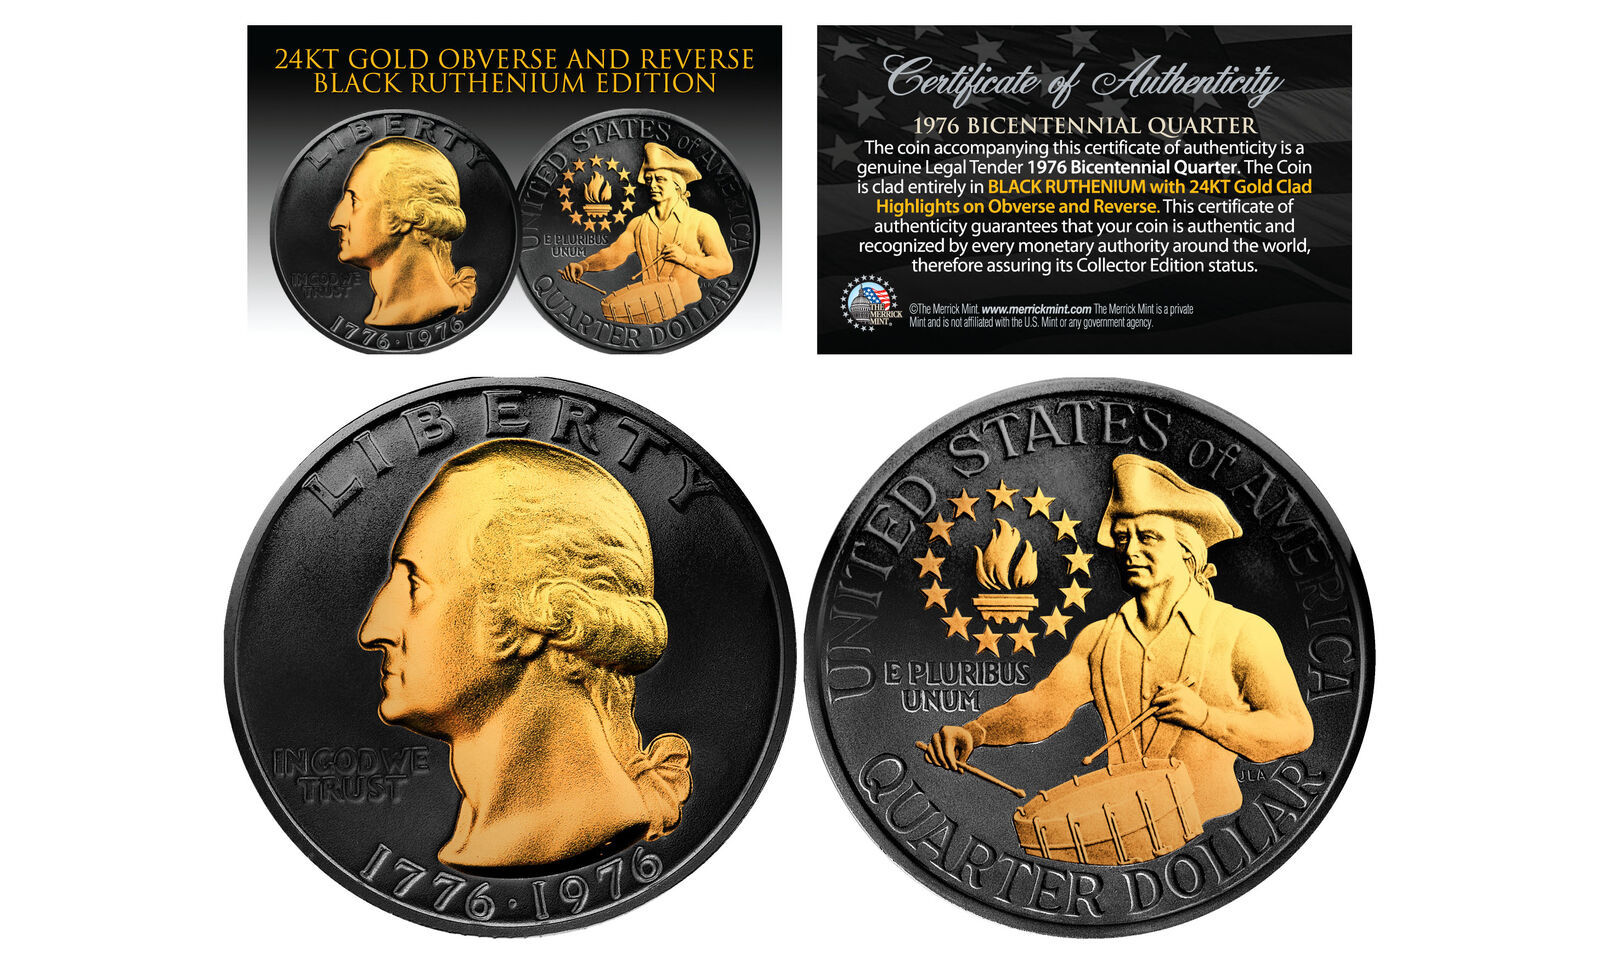 Primary image for 1976 BLACK RUTHENIUM Bicentennial US Quarter Coin w/ 24K GOLD features 2-Sided